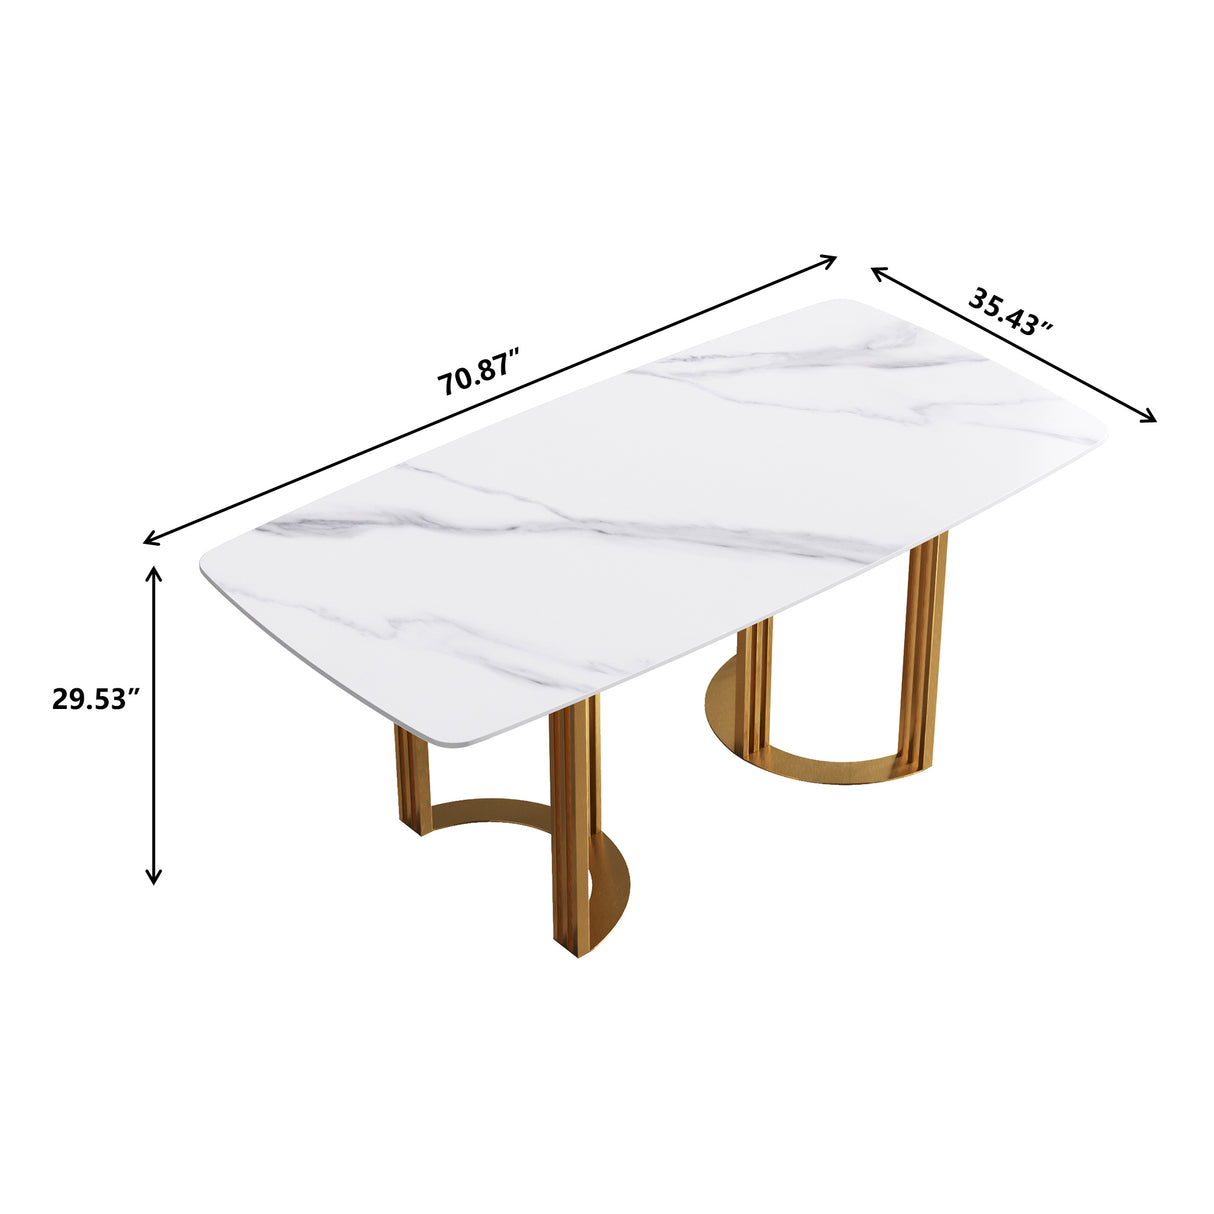 70.87"Modern artificial stone white curved golden metal leg dining table-can accommodate 6-8 people - Home Elegance USA